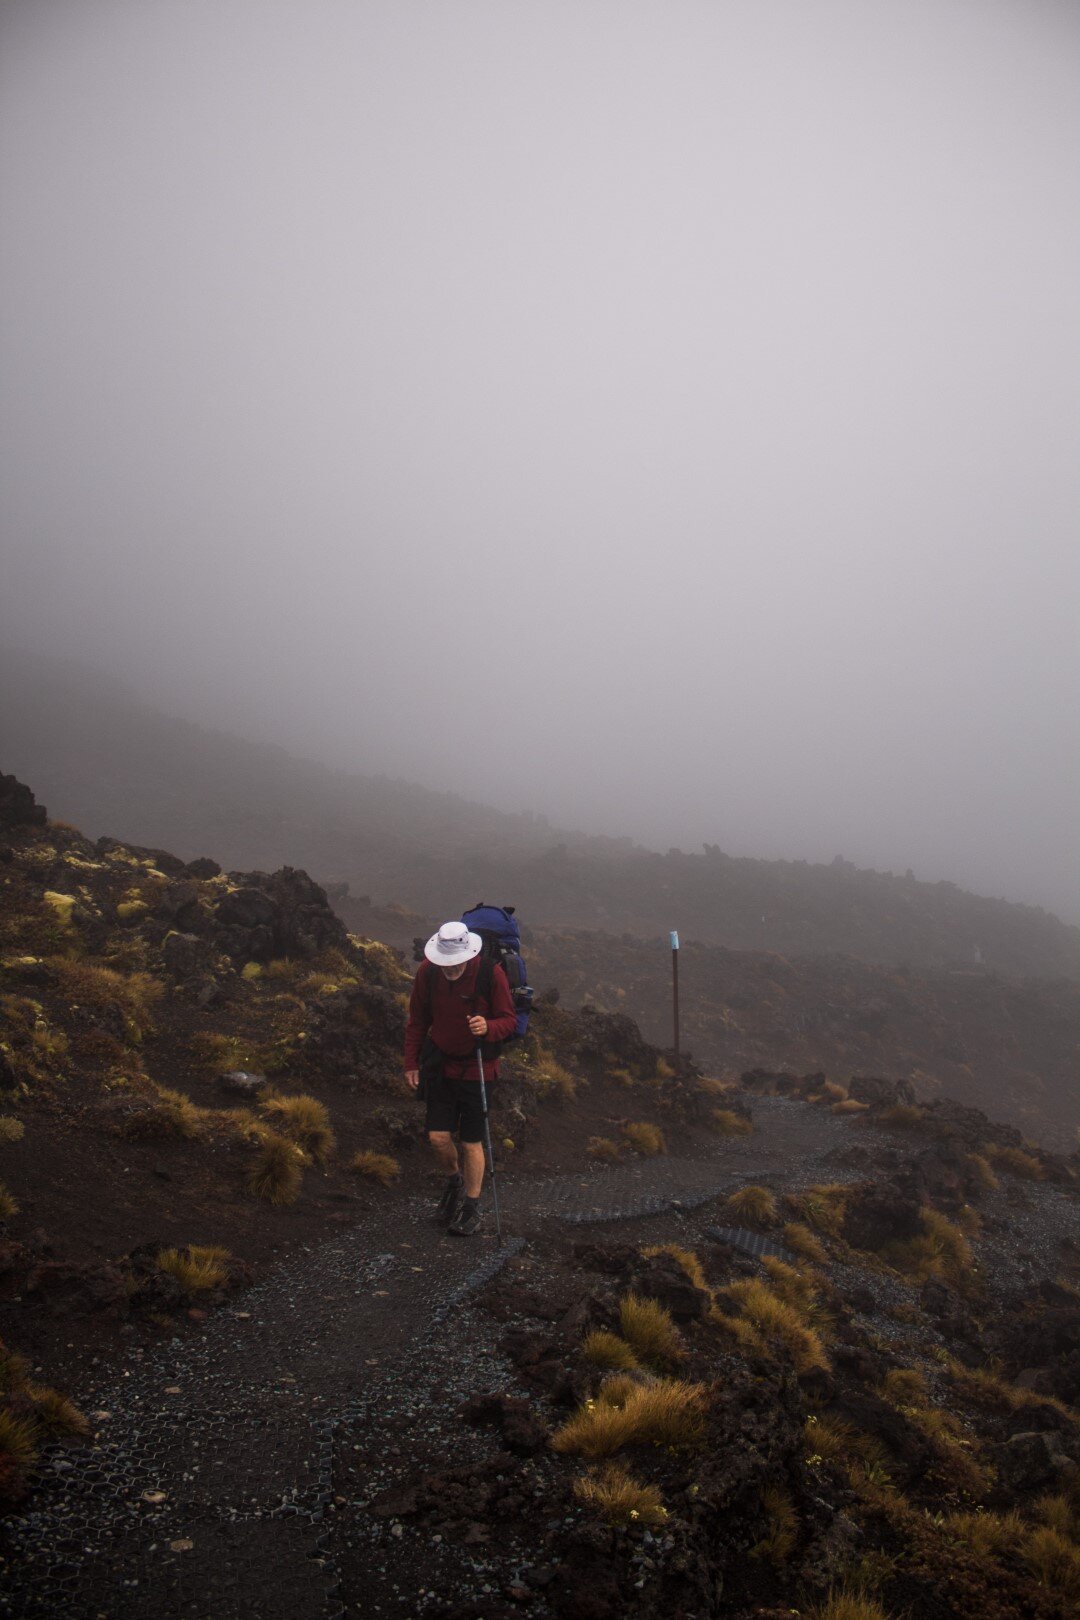 Day 1: Ascending the Devils’ Staircase towards Red Crater